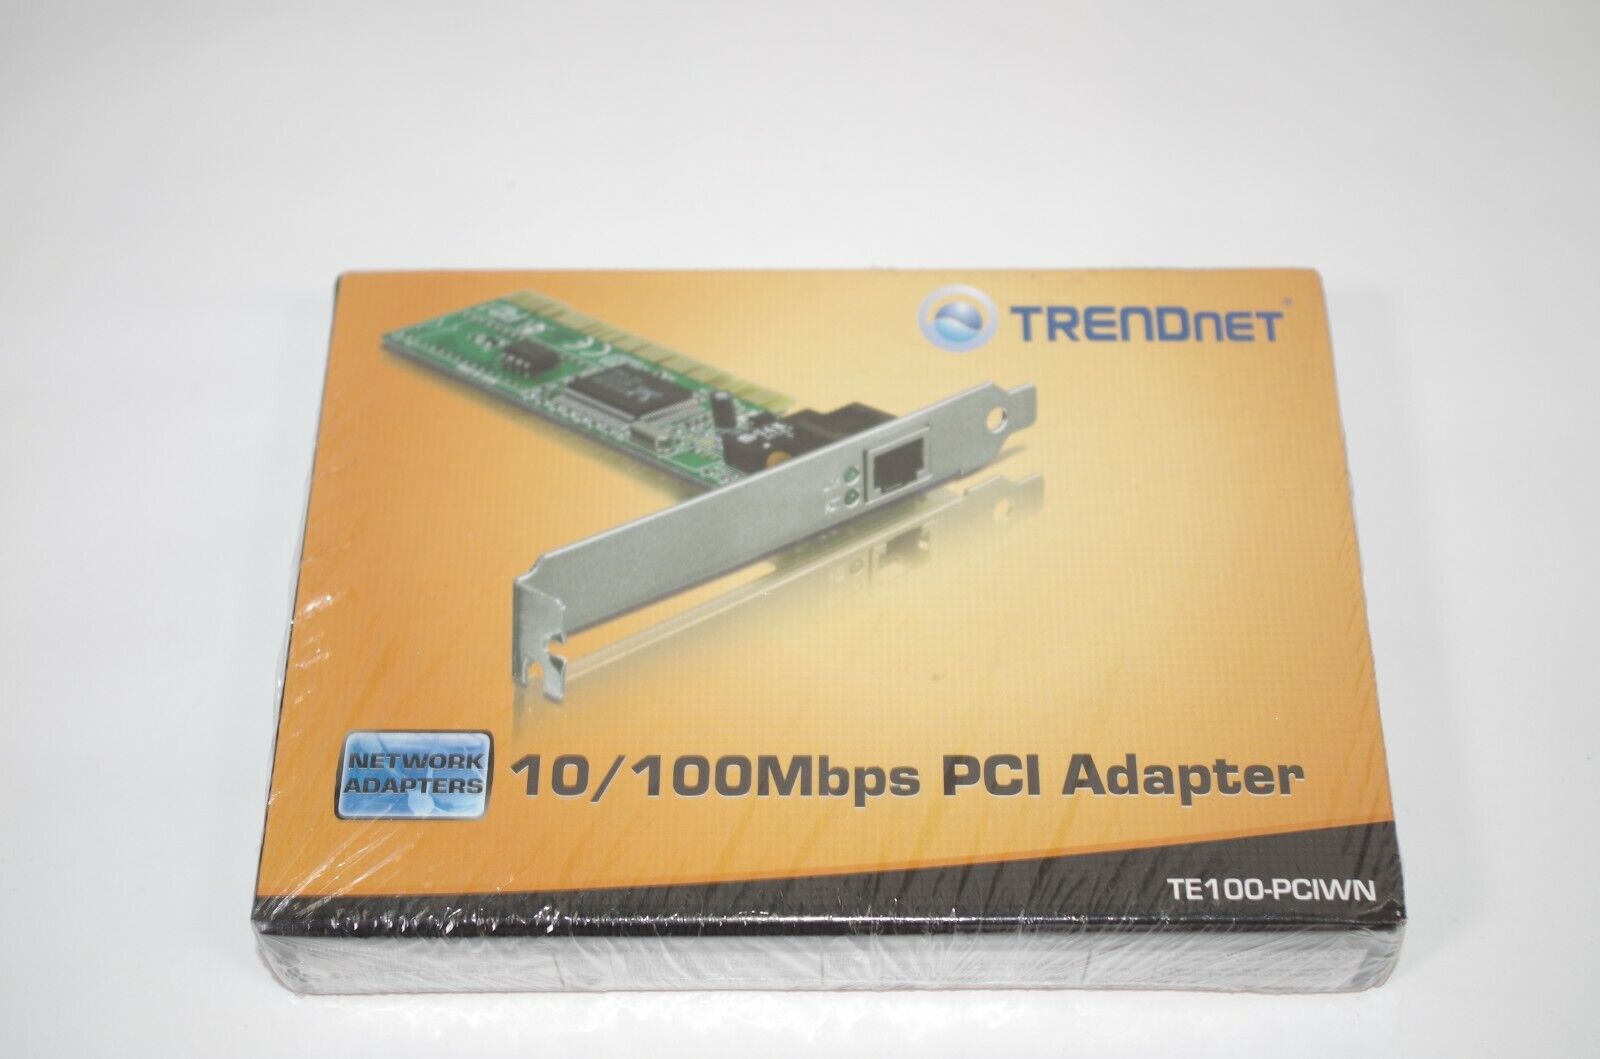 TRENDnet 10/100Mbps PCI Adapter TE100-PCIWN New